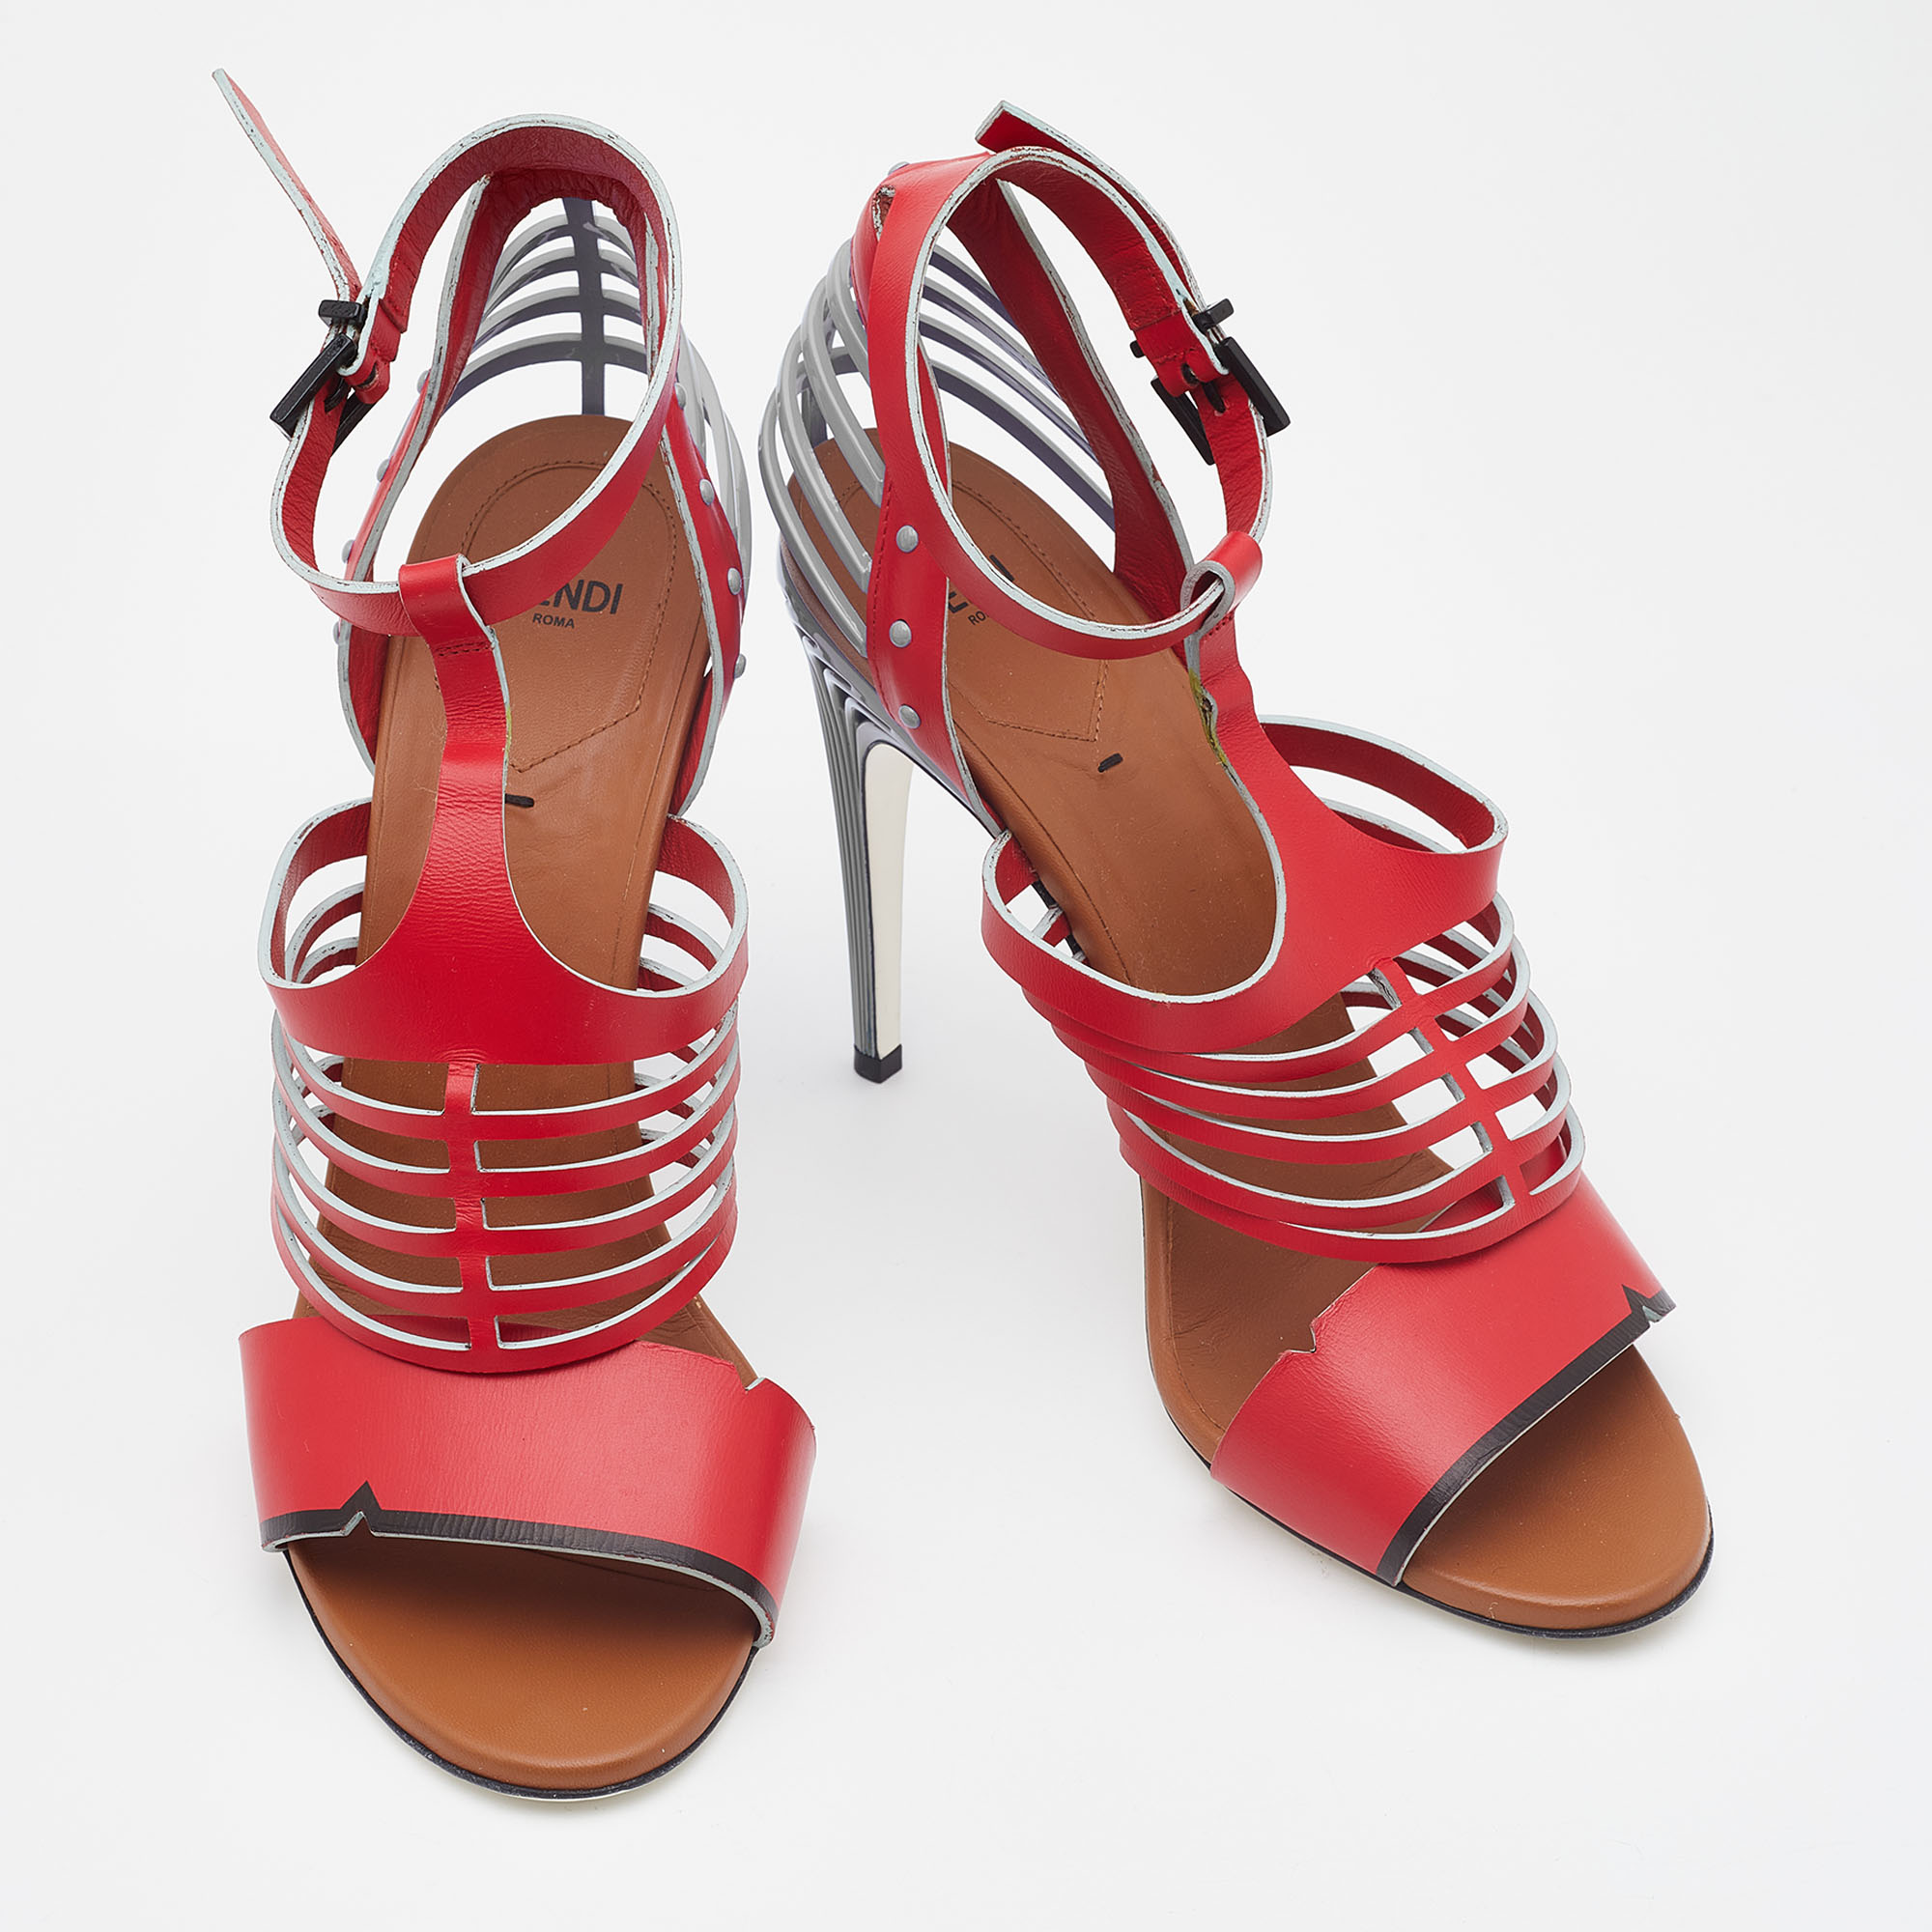 Fendi Red/Blue Leather Tiffany Ankle Strap Sandals Size 41